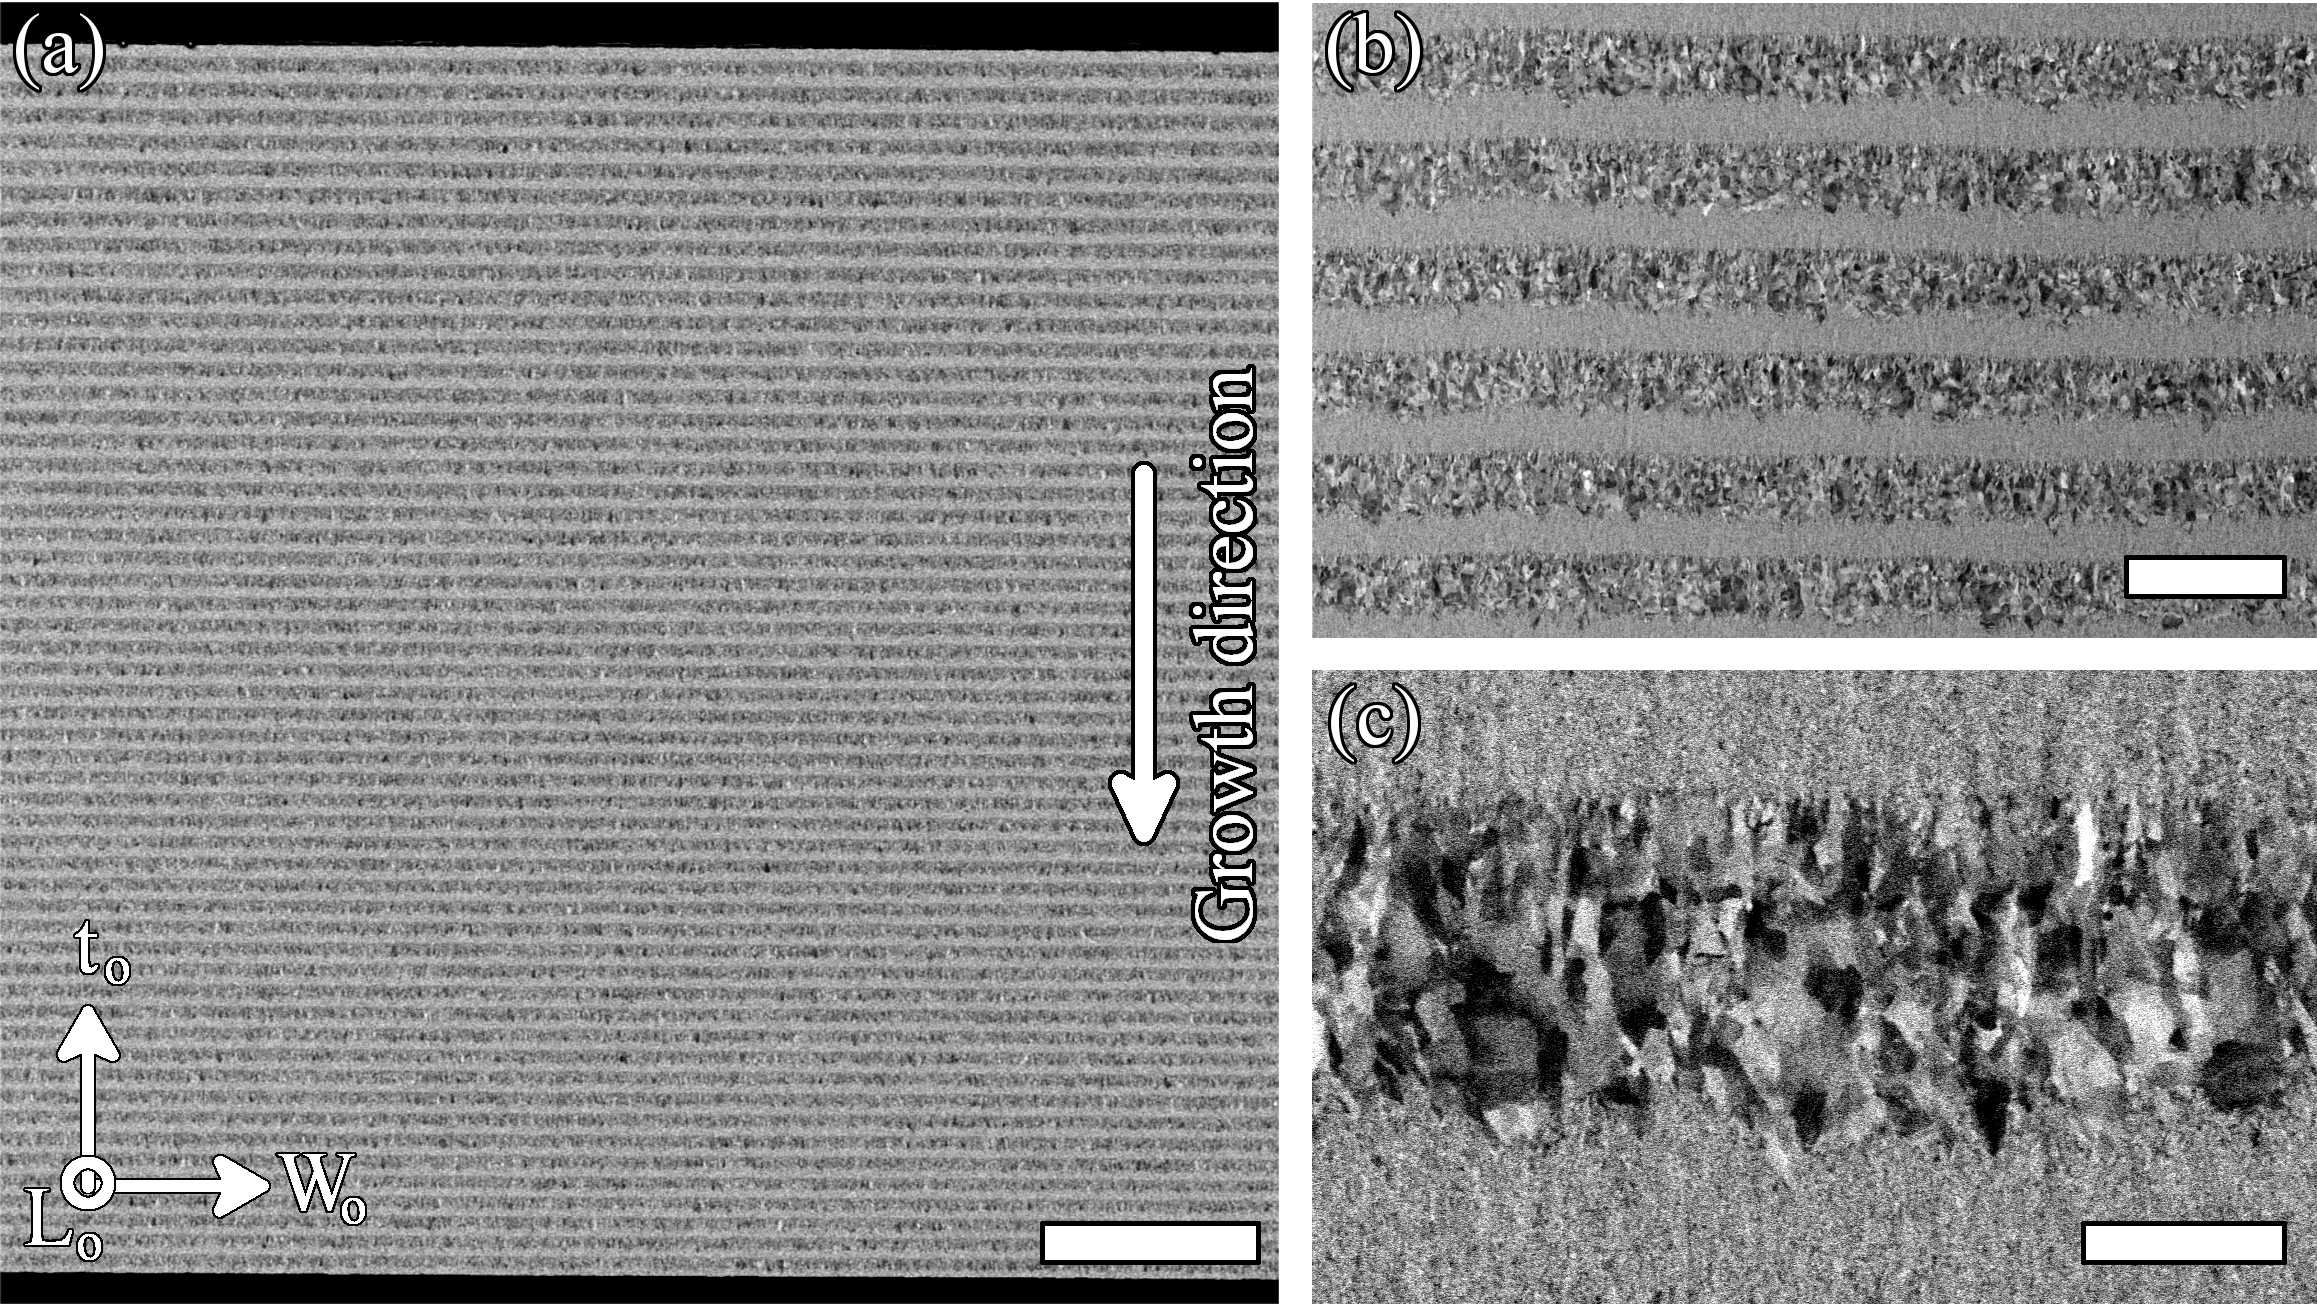 Microstructure of multilayer with modulated grain size